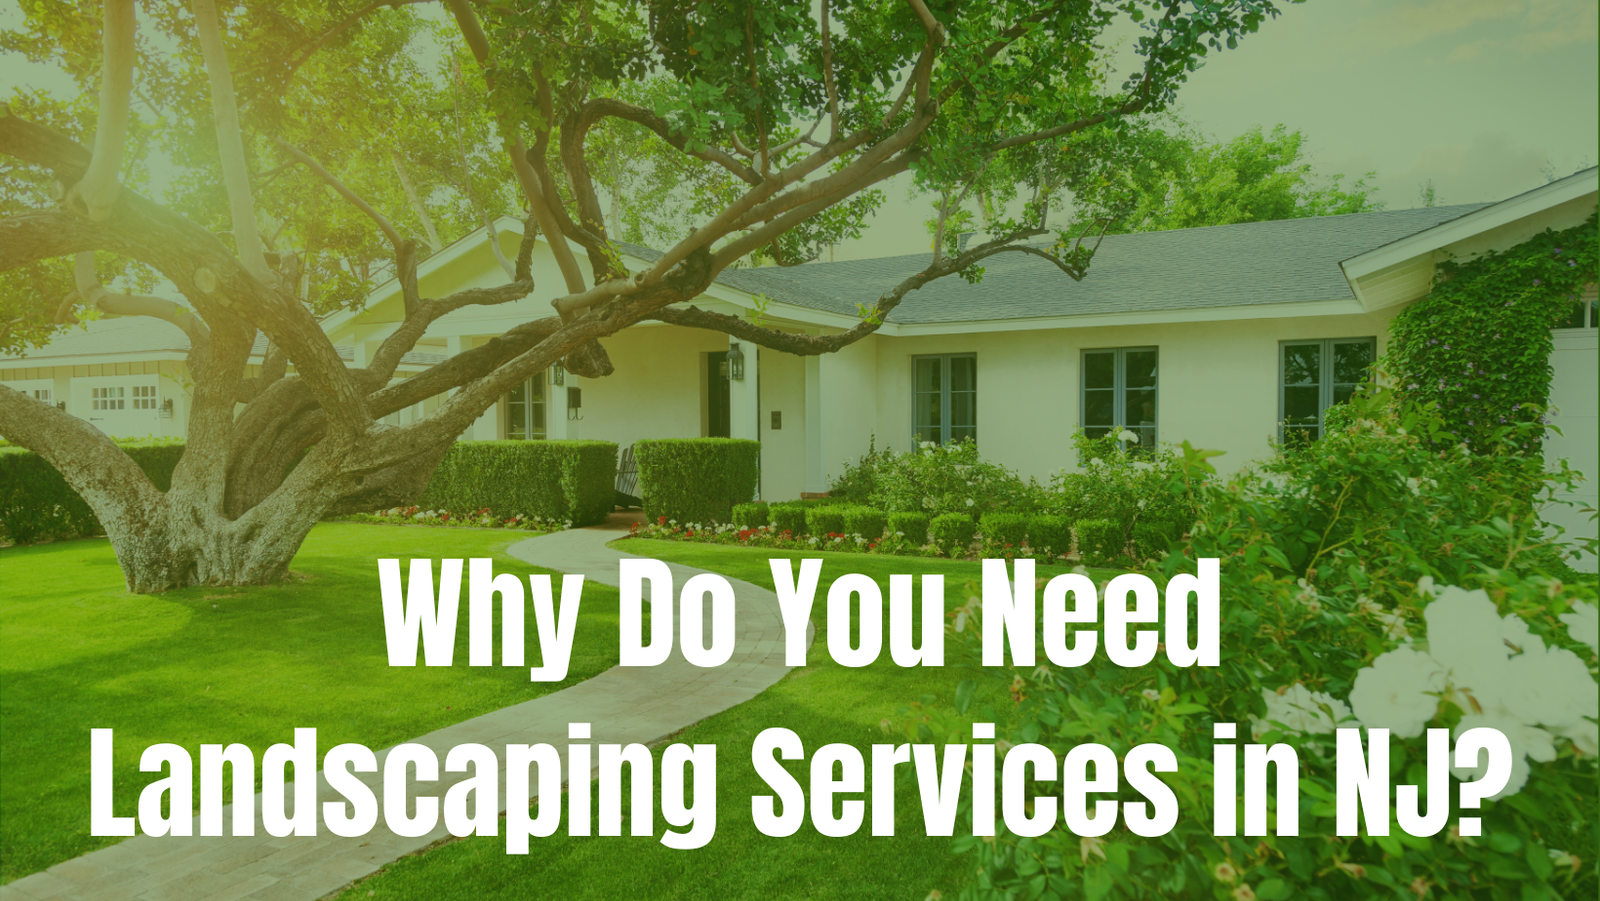 Why Do You Need Landscaping Services in NJ